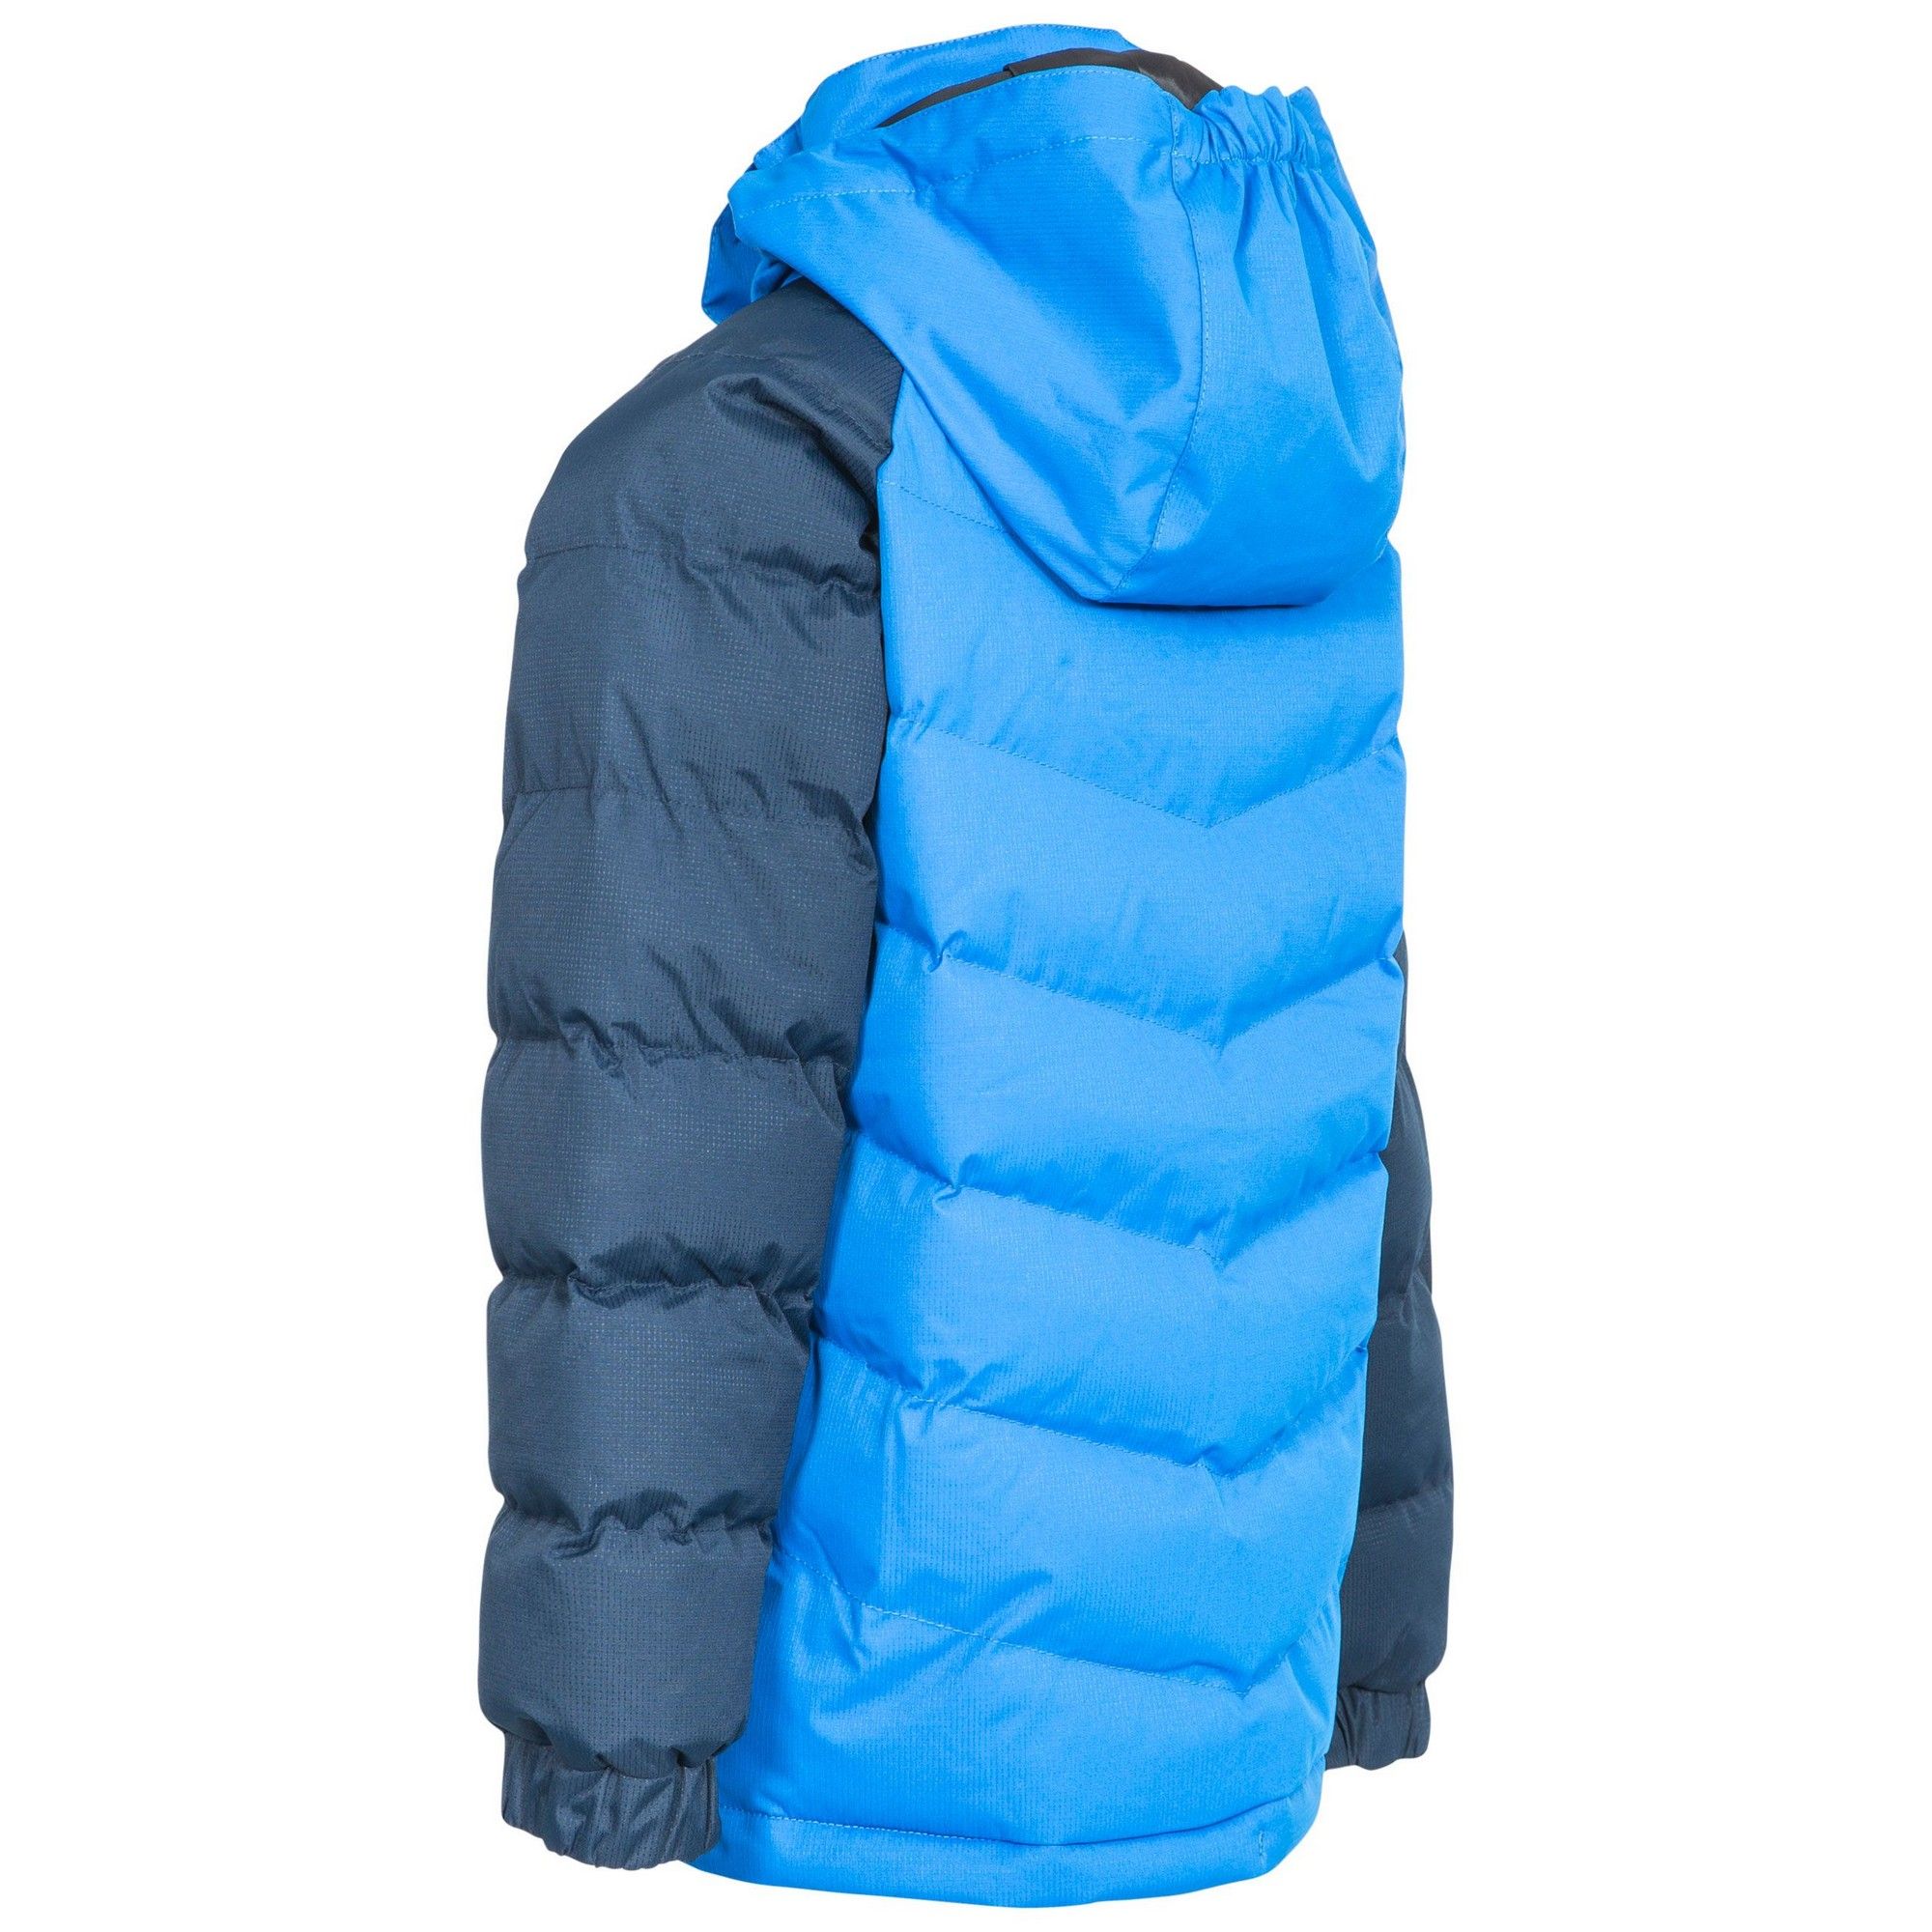 Padded. Detachable stud off hood. 2 zip pockets. Elasticated cuff. Hem drawcord. Contrast sleeves. Waterproof 2000mm, windproof. Shell: 100% Polyester, PVC coating, Lining: 100% Polyester, Filling: 100% Polyester. Trespass Childrens Chest Sizing (approx): 2/3 Years - 21in/53cm, 3/4 Years - 22in/56cm, 5/6 Years - 24in/61cm, 7/8 Years - 26in/66cm, 9/10 Years - 28in/71cm, 11/12 Years - 31in/79cm.